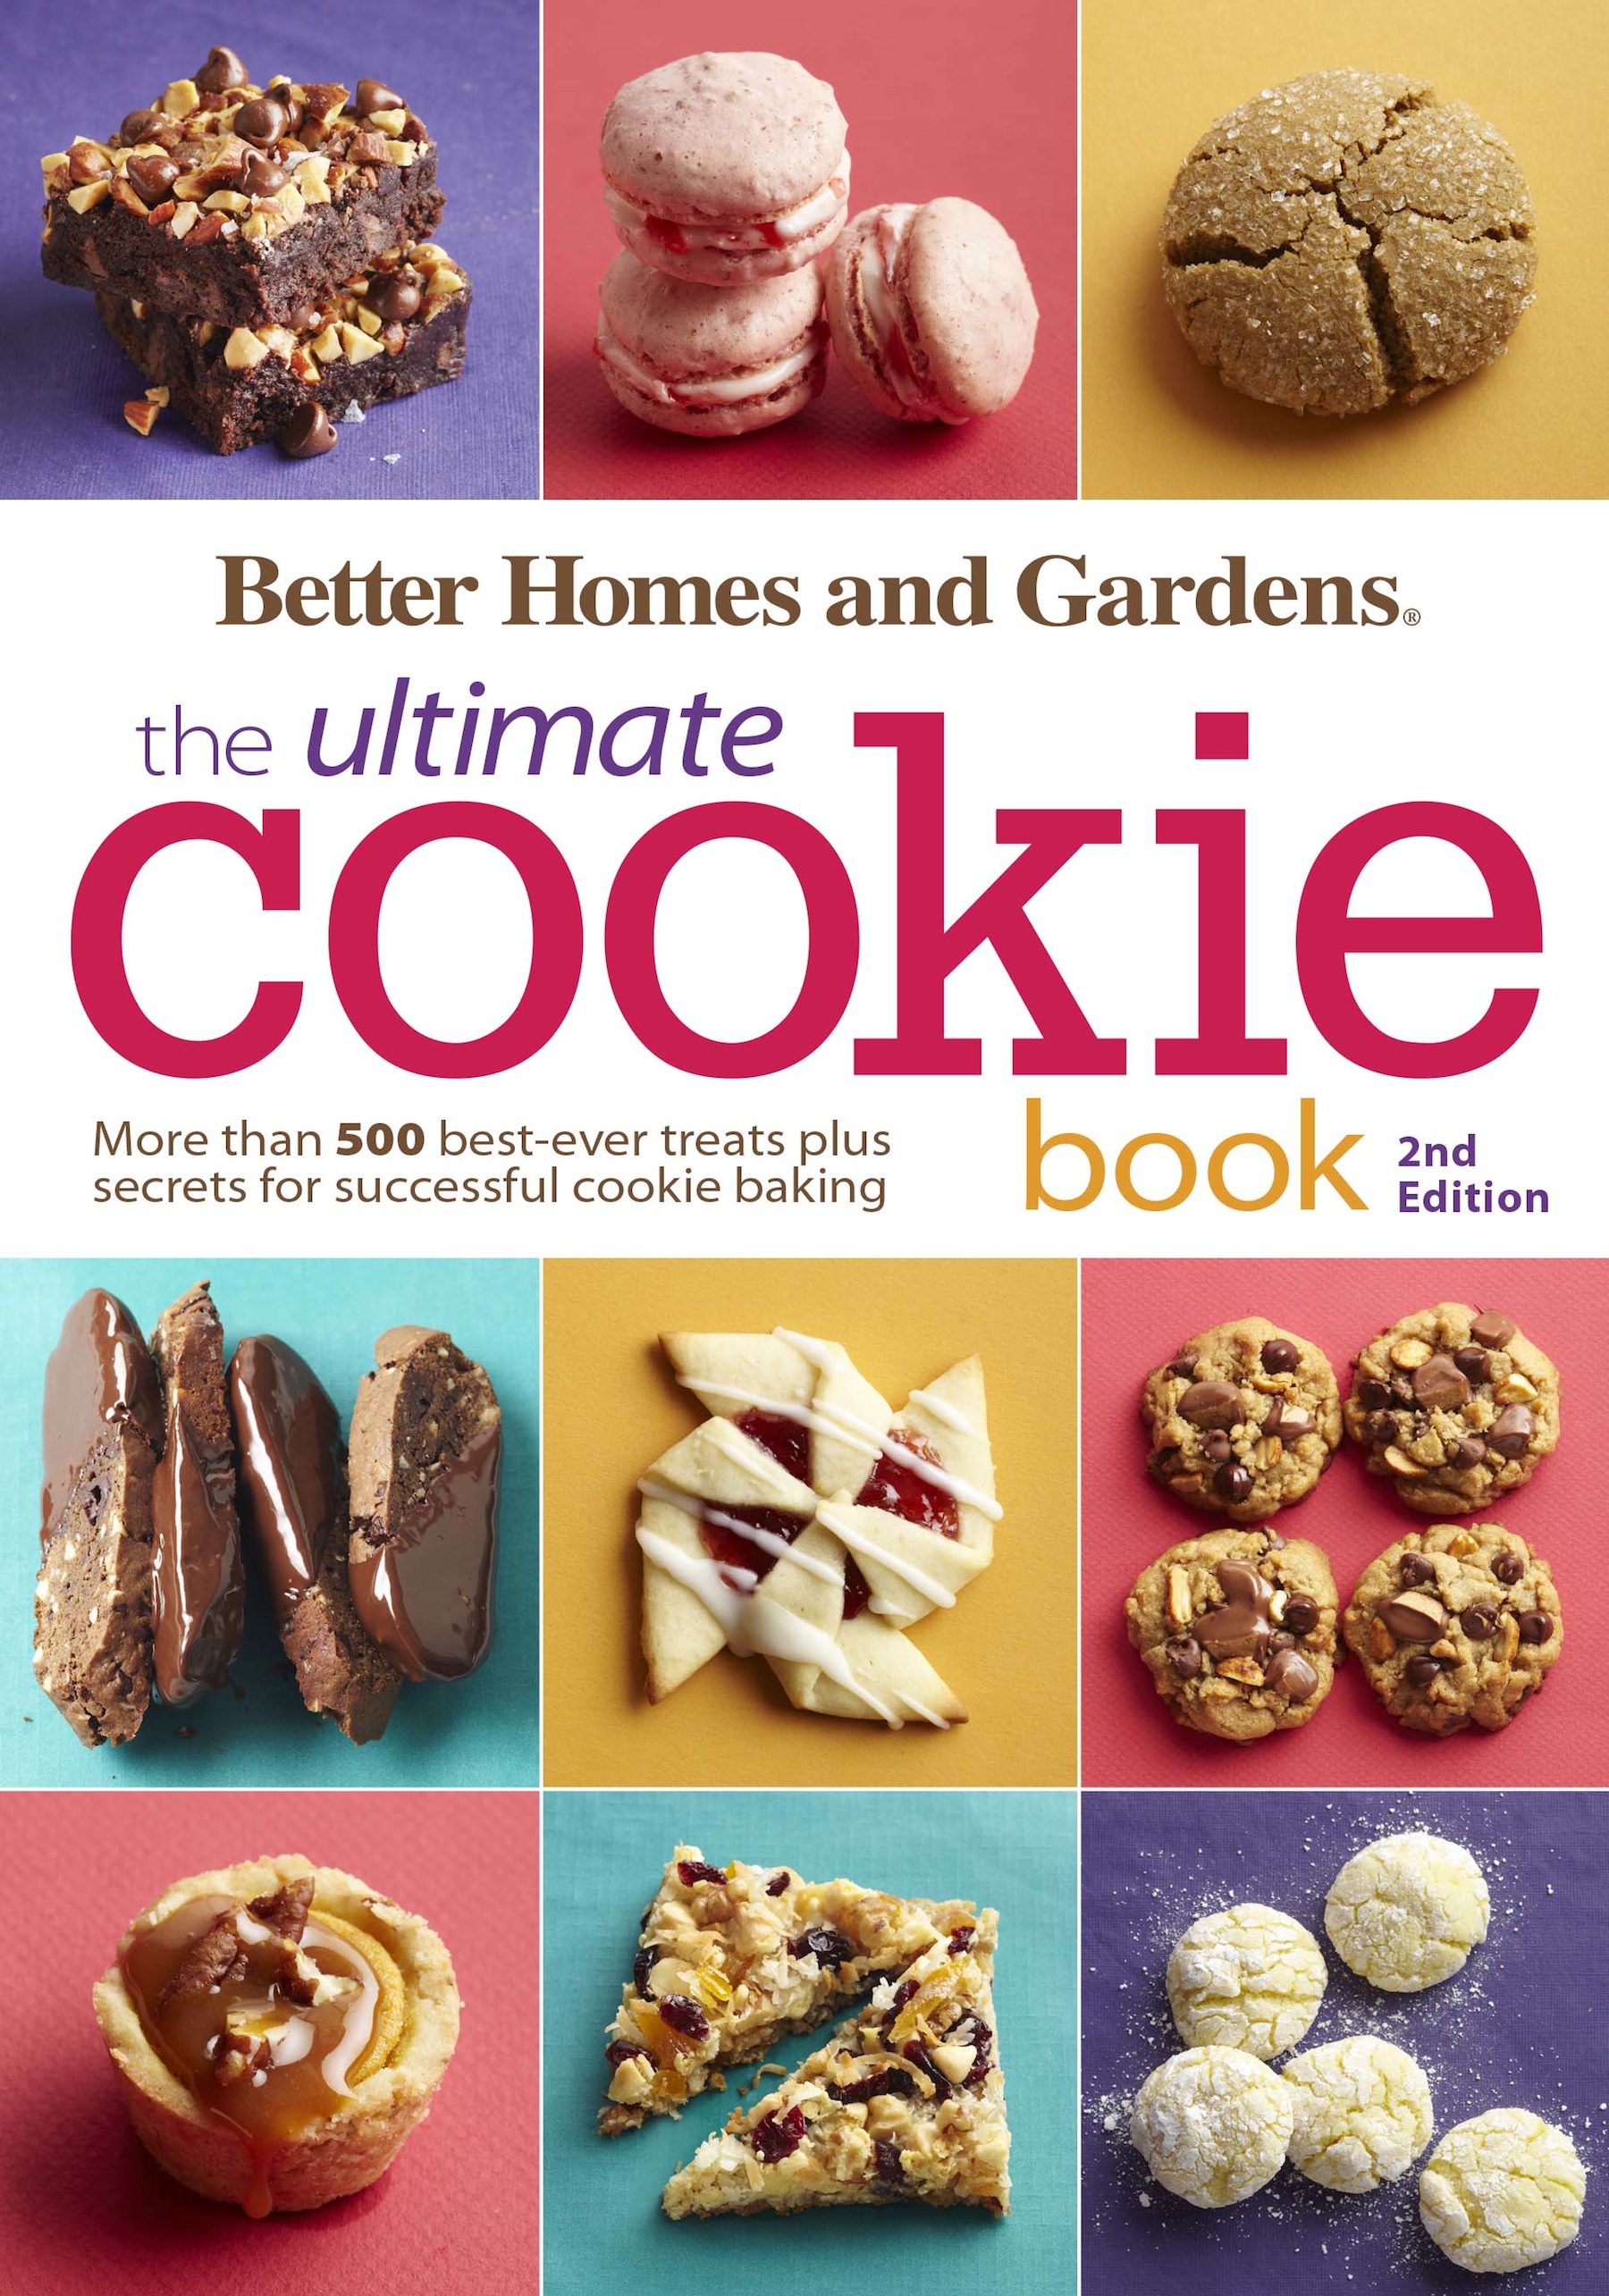 Image de couverture de Better Homes and Gardens The Ultimate Cookie Book, Second Edition [electronic resource] : More than 500 Best-Ever Treats Plus Secrets for Successful Cookie Baking